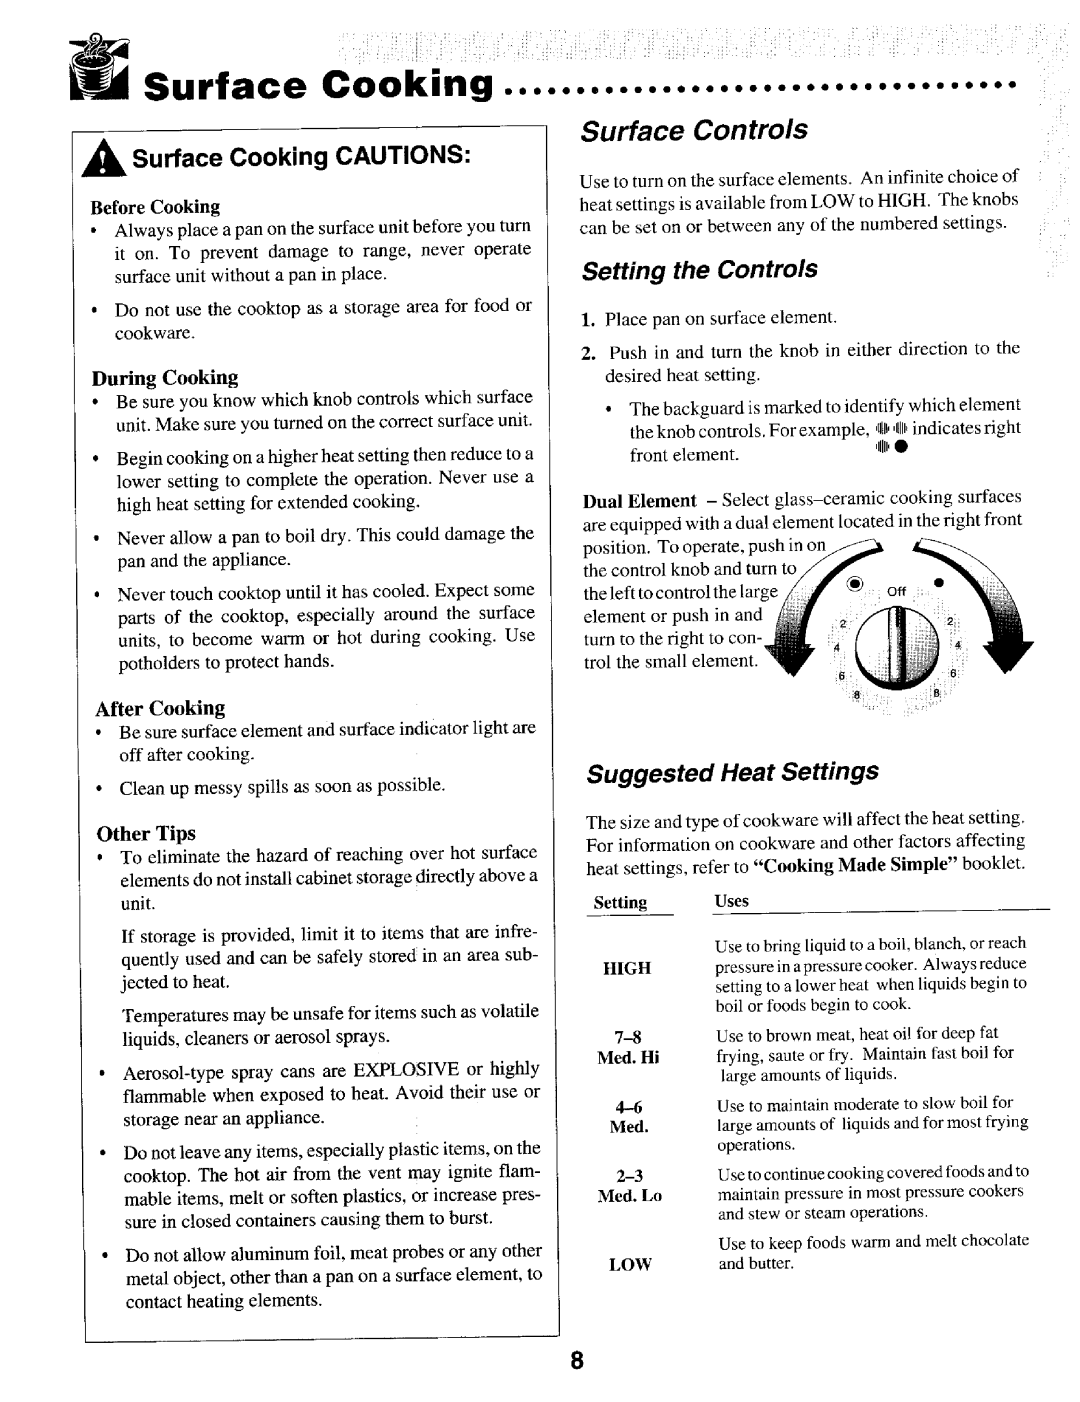 Maytag T1 manual Surface Controls, ASurface Cooking CAUTIONS, Setting the Controls, Suggested Heat Settings 